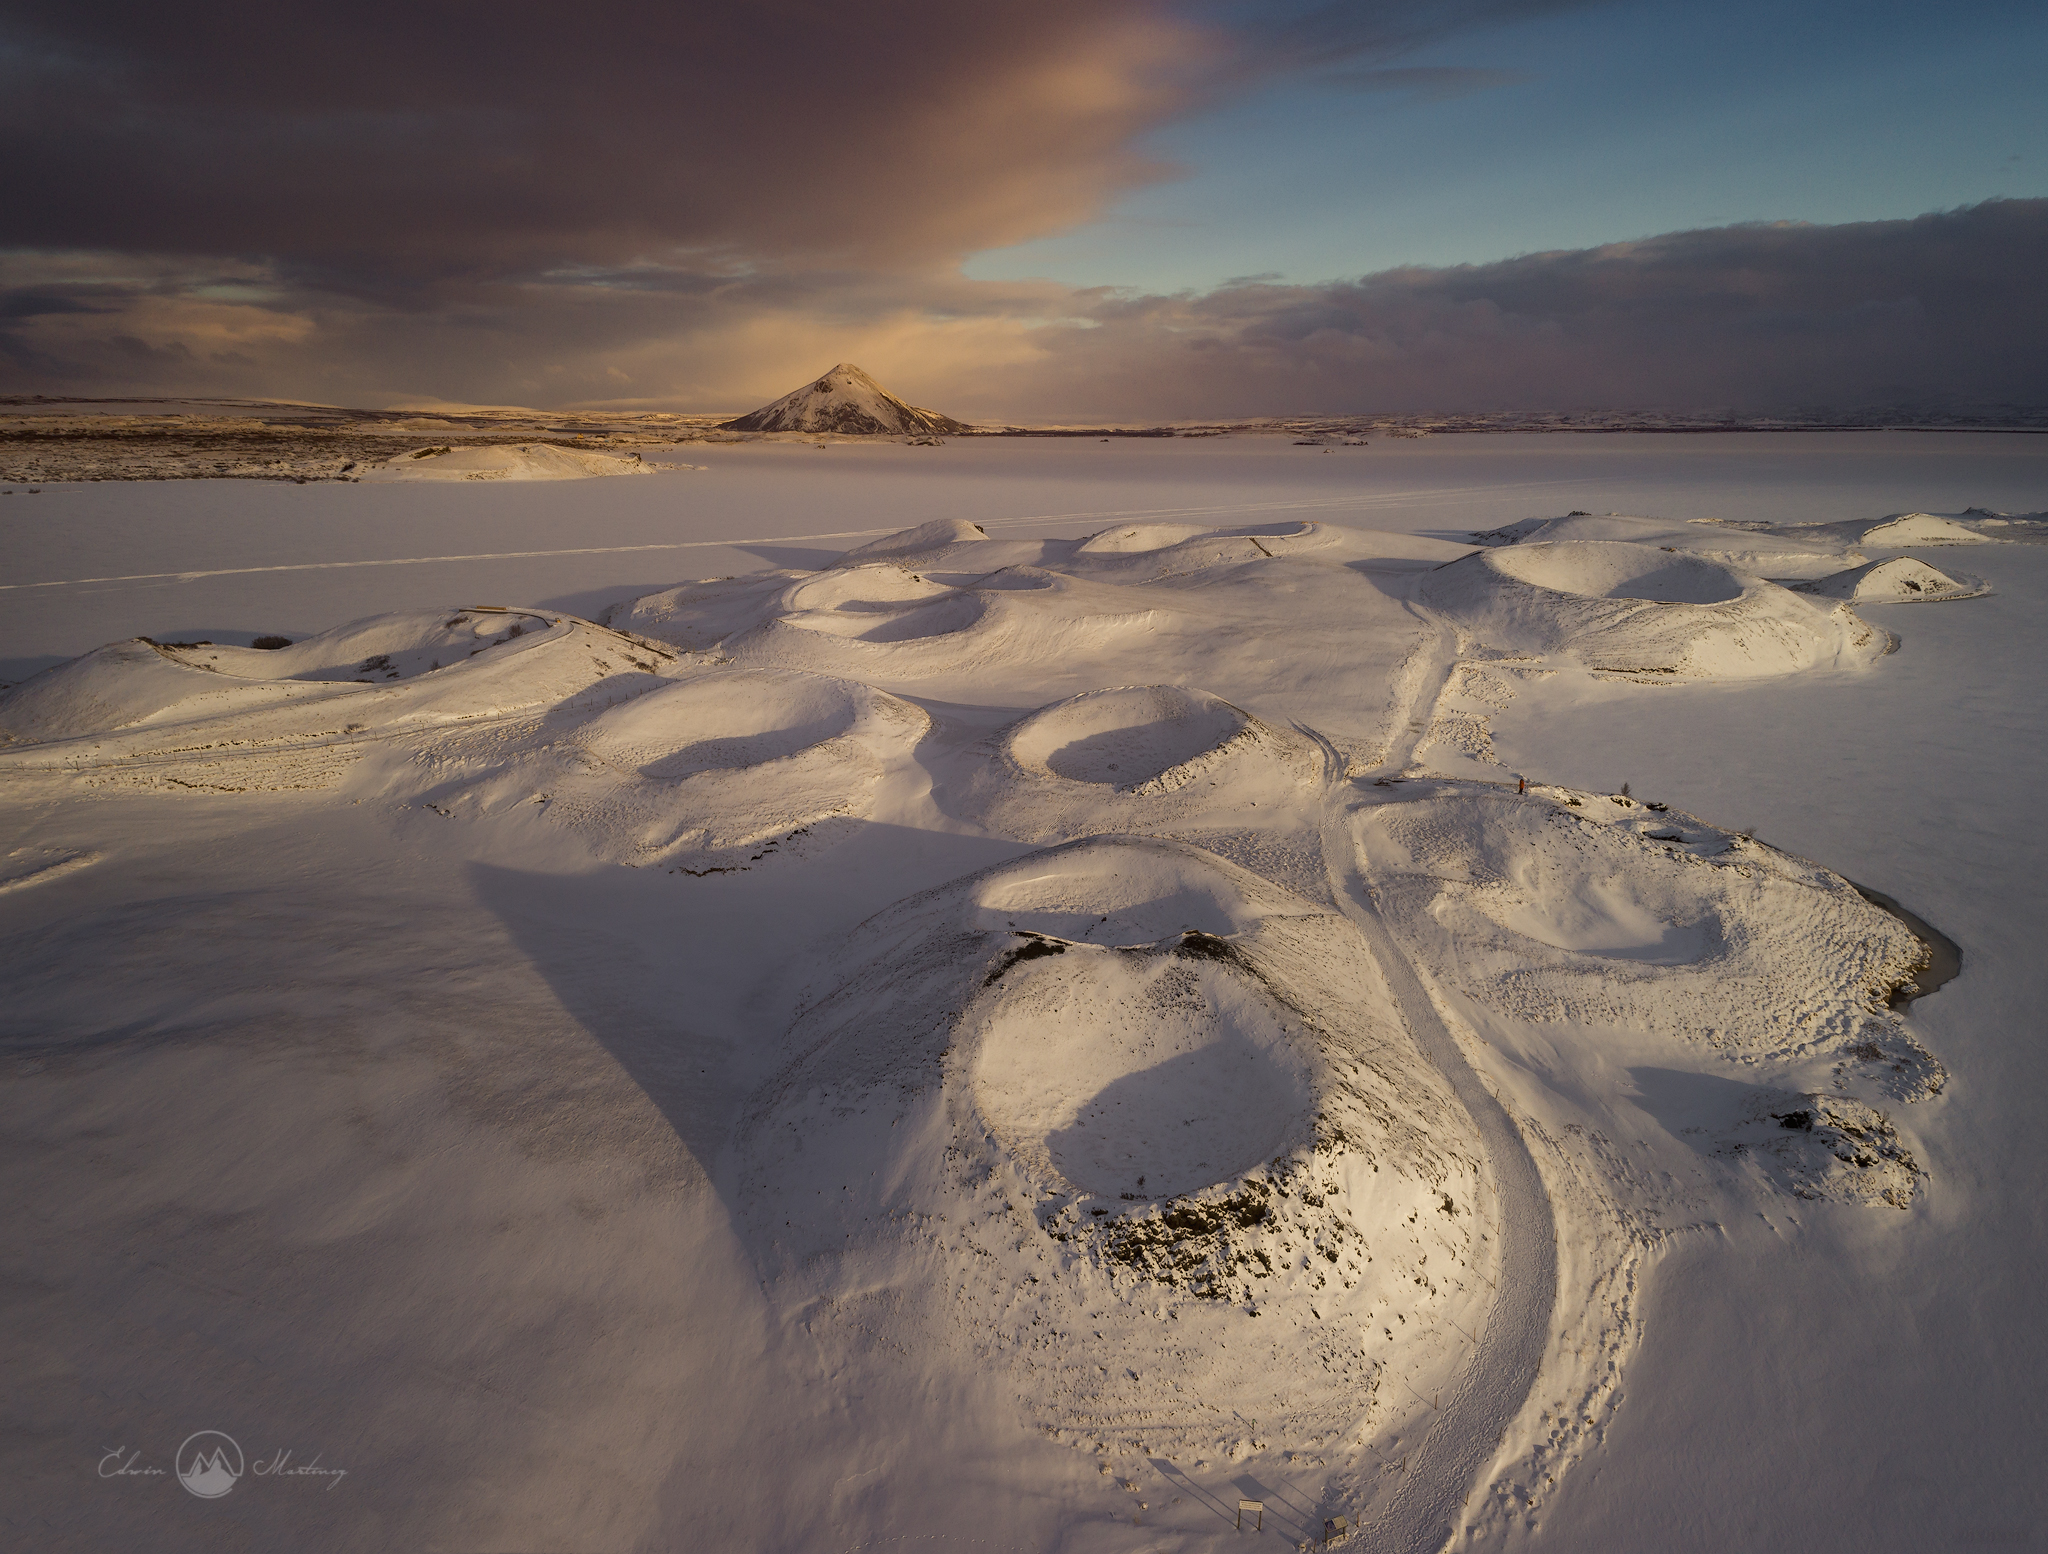 Iceland in the wintertime cpvered in snow and ice makes the perfect subject for a landscape photographer.